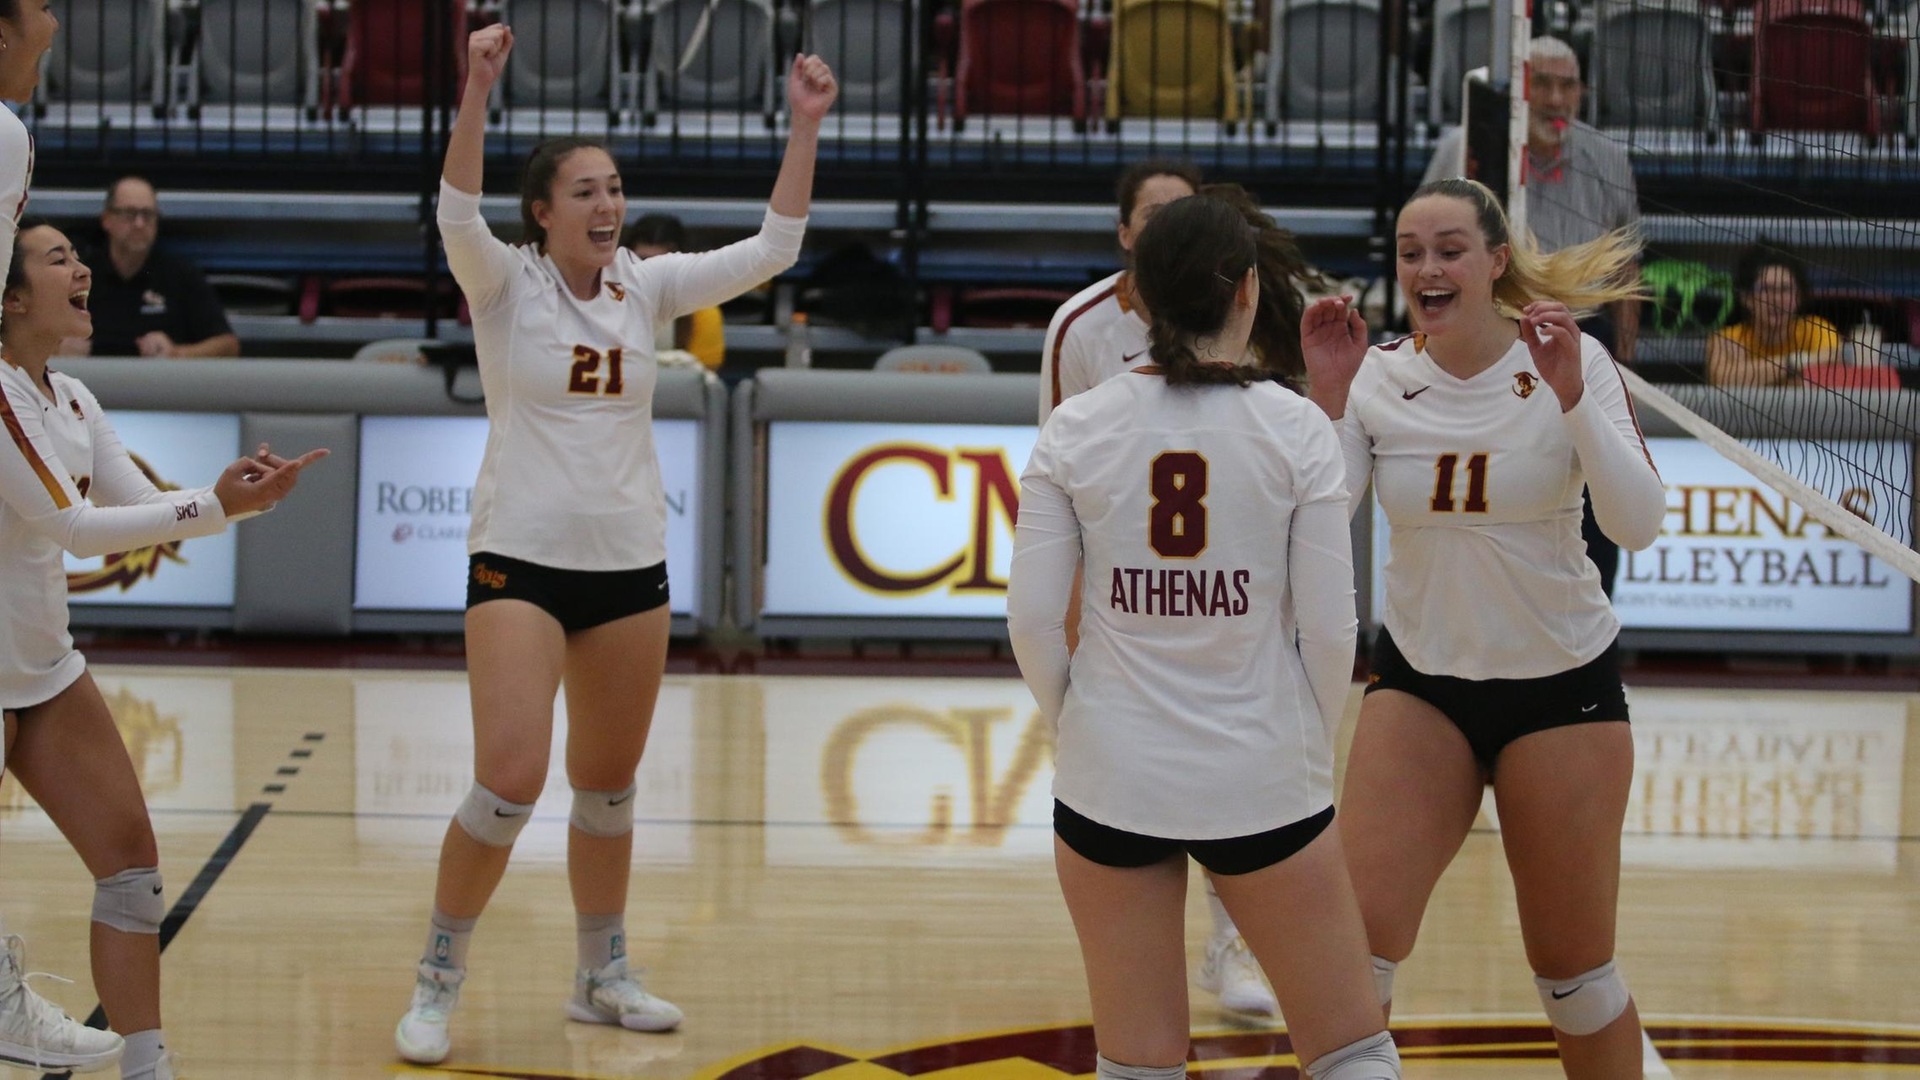 CMS celebrates moving to 7-0 in SCIAC (photo by Stella Cheng)